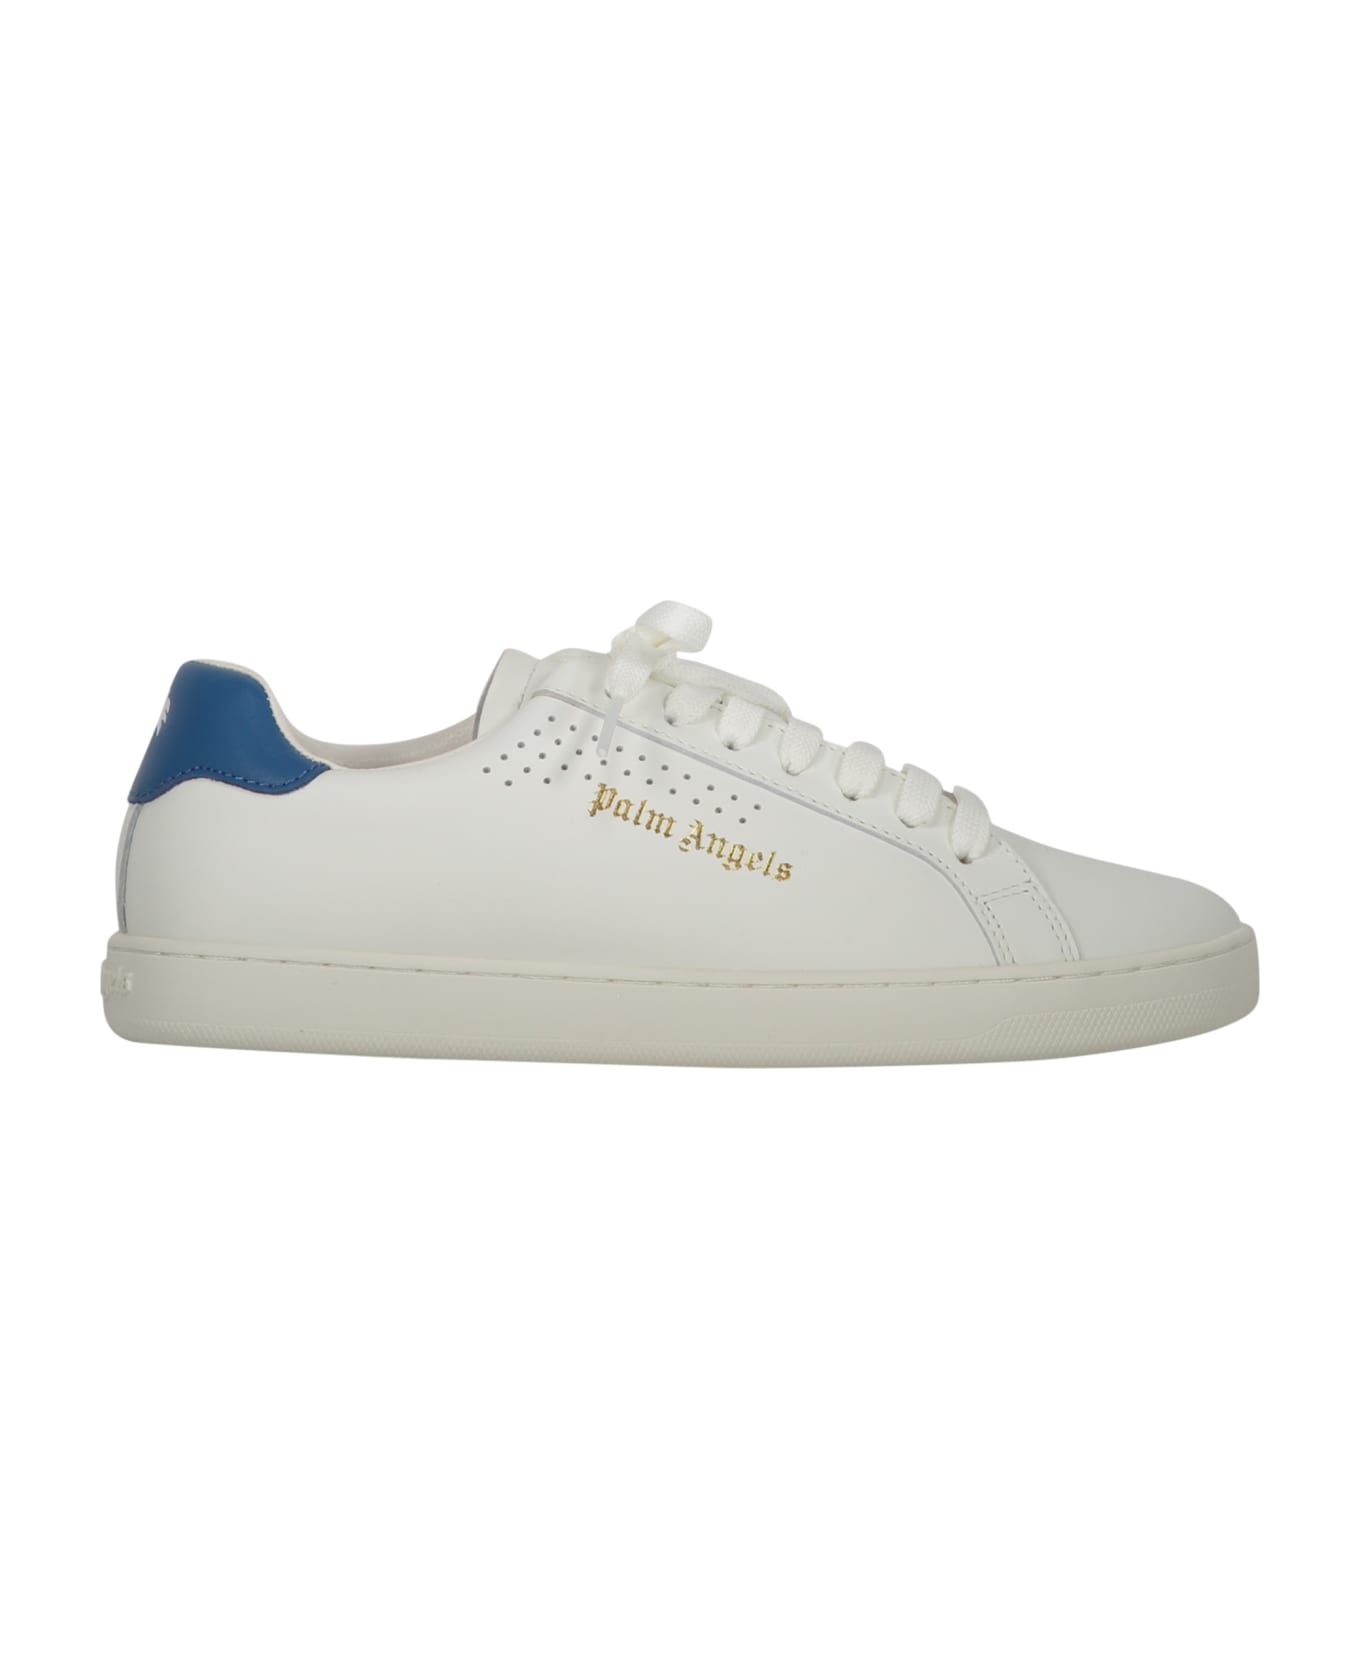 Palm Angels New Tennis Leather Sneakers - White